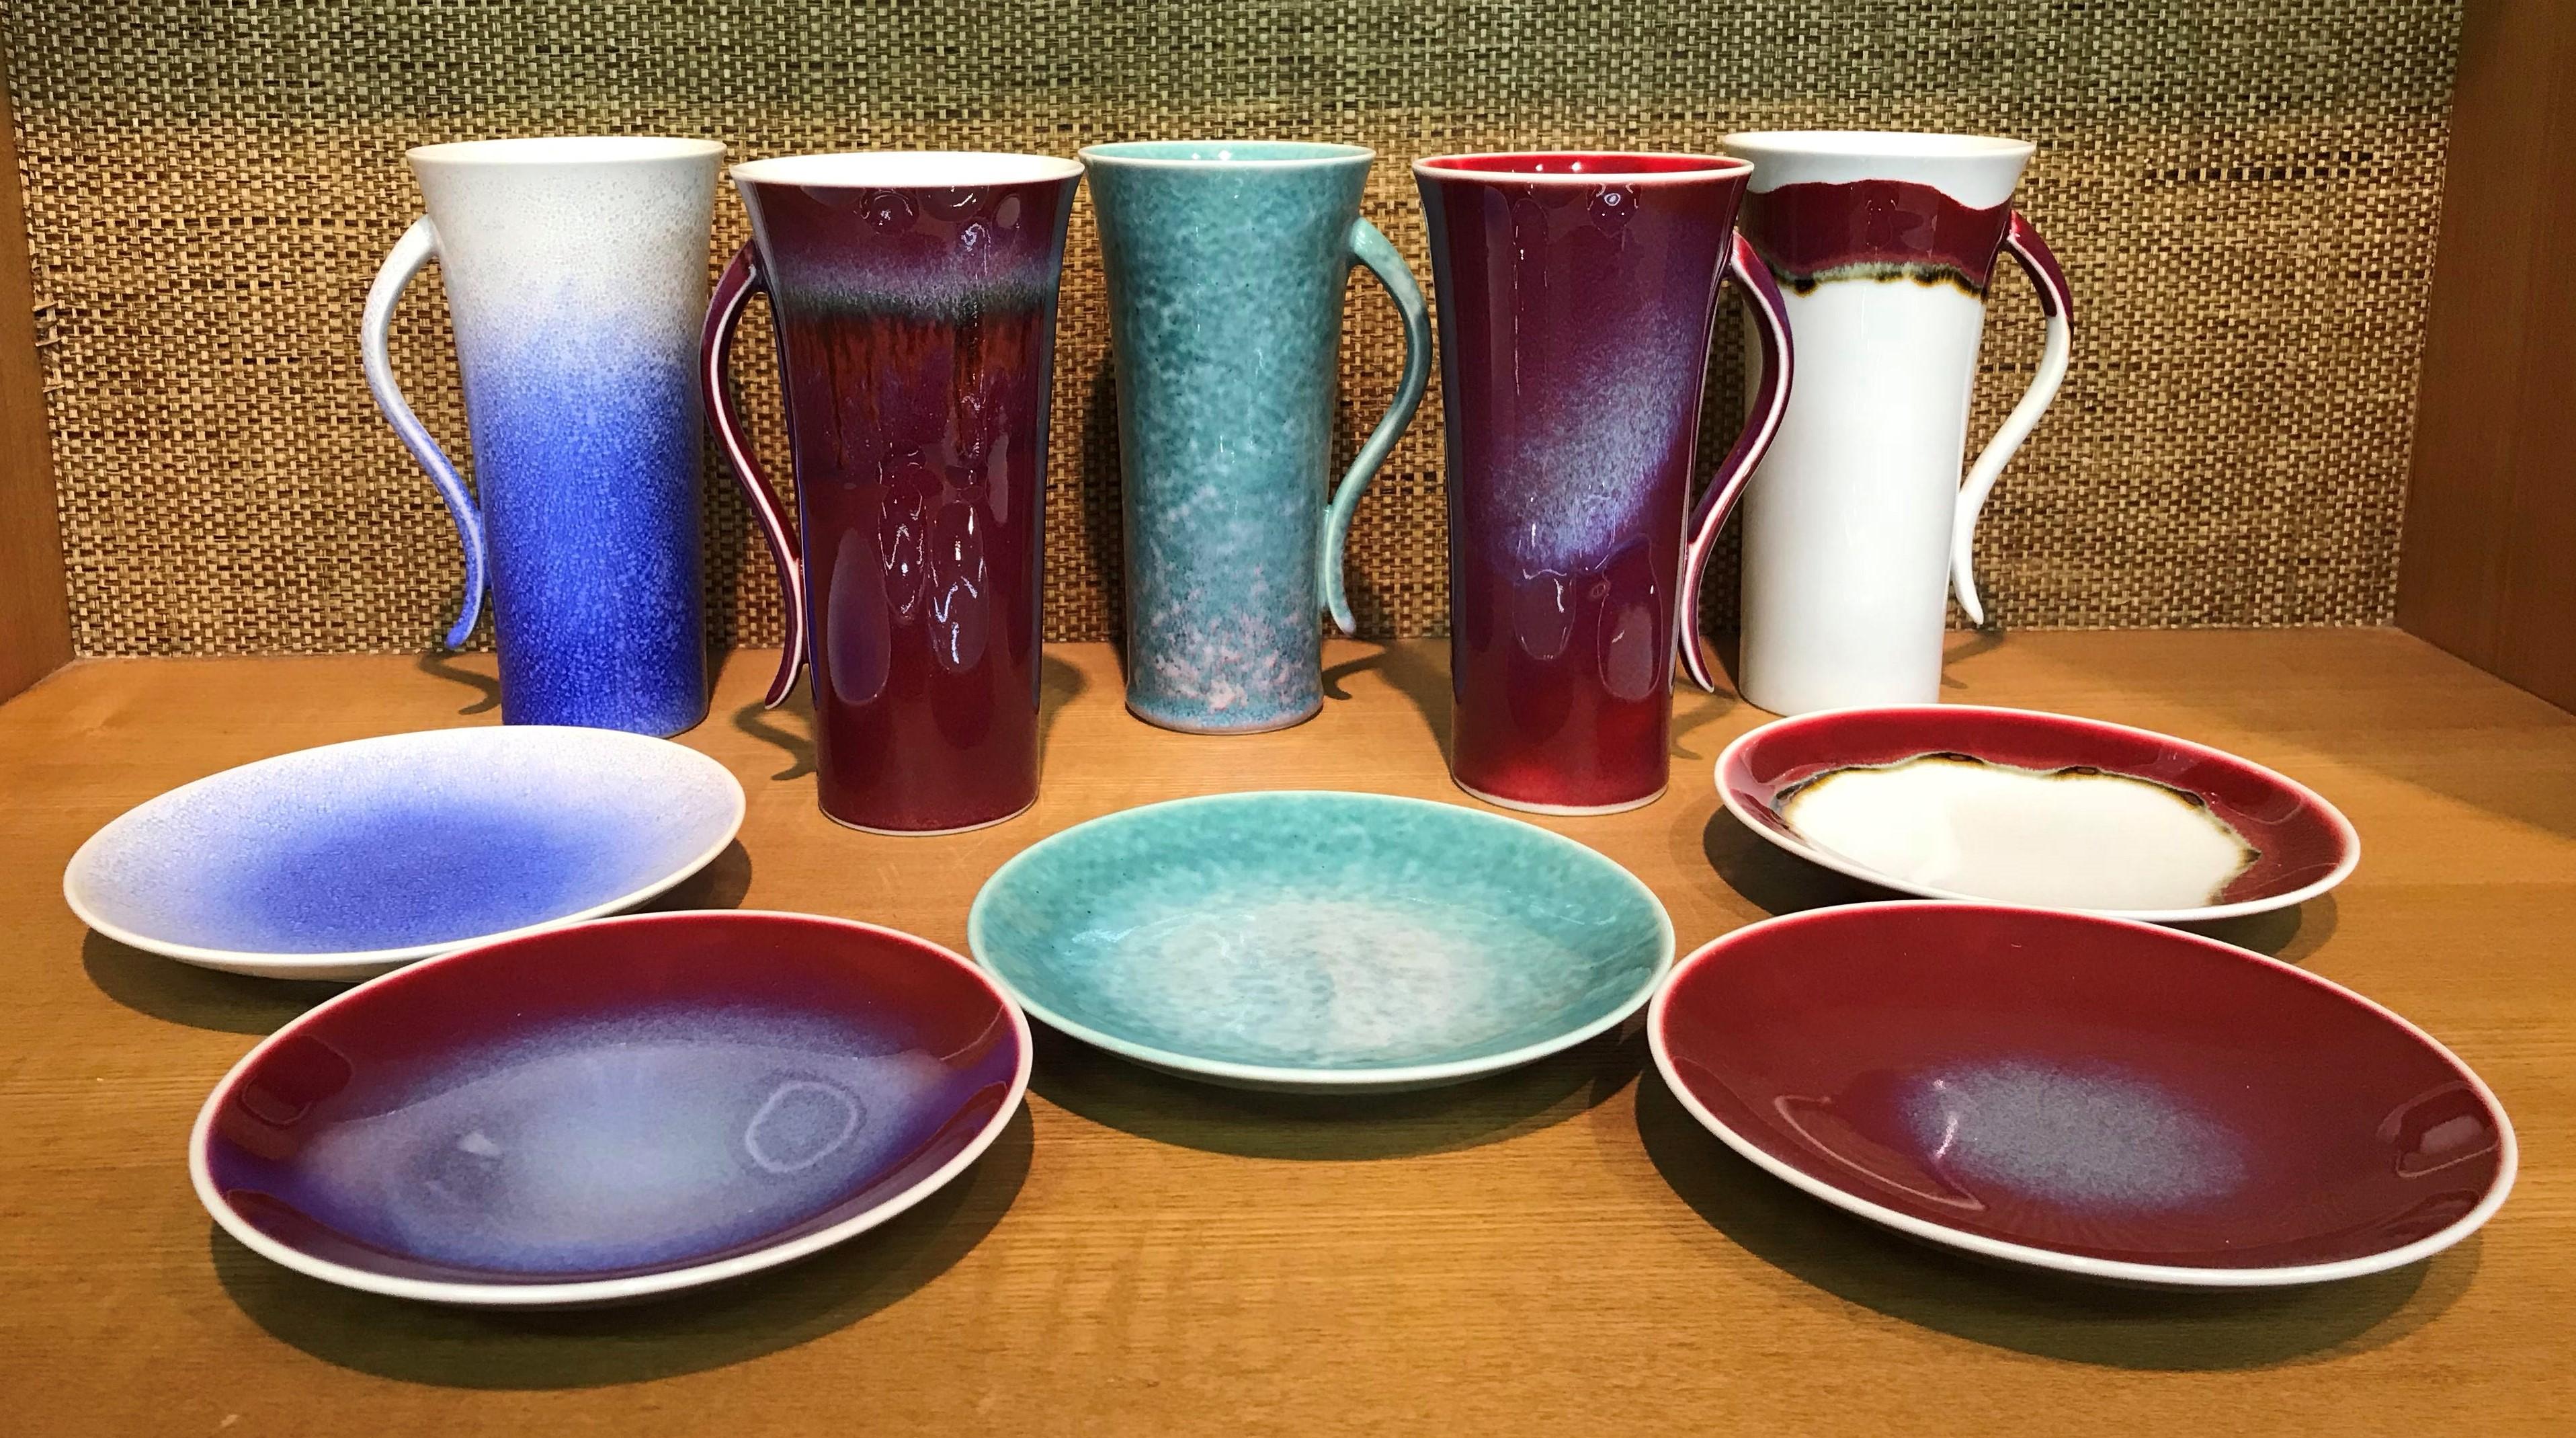 Extraordinary set of five contemporary Japanese tall hand-glazed porcelain mugs/cups and matching dessert plates, handsomely proportioned and masterfully glazed in the artist's signature blue, wine-red, green and white, signed pieces by widely